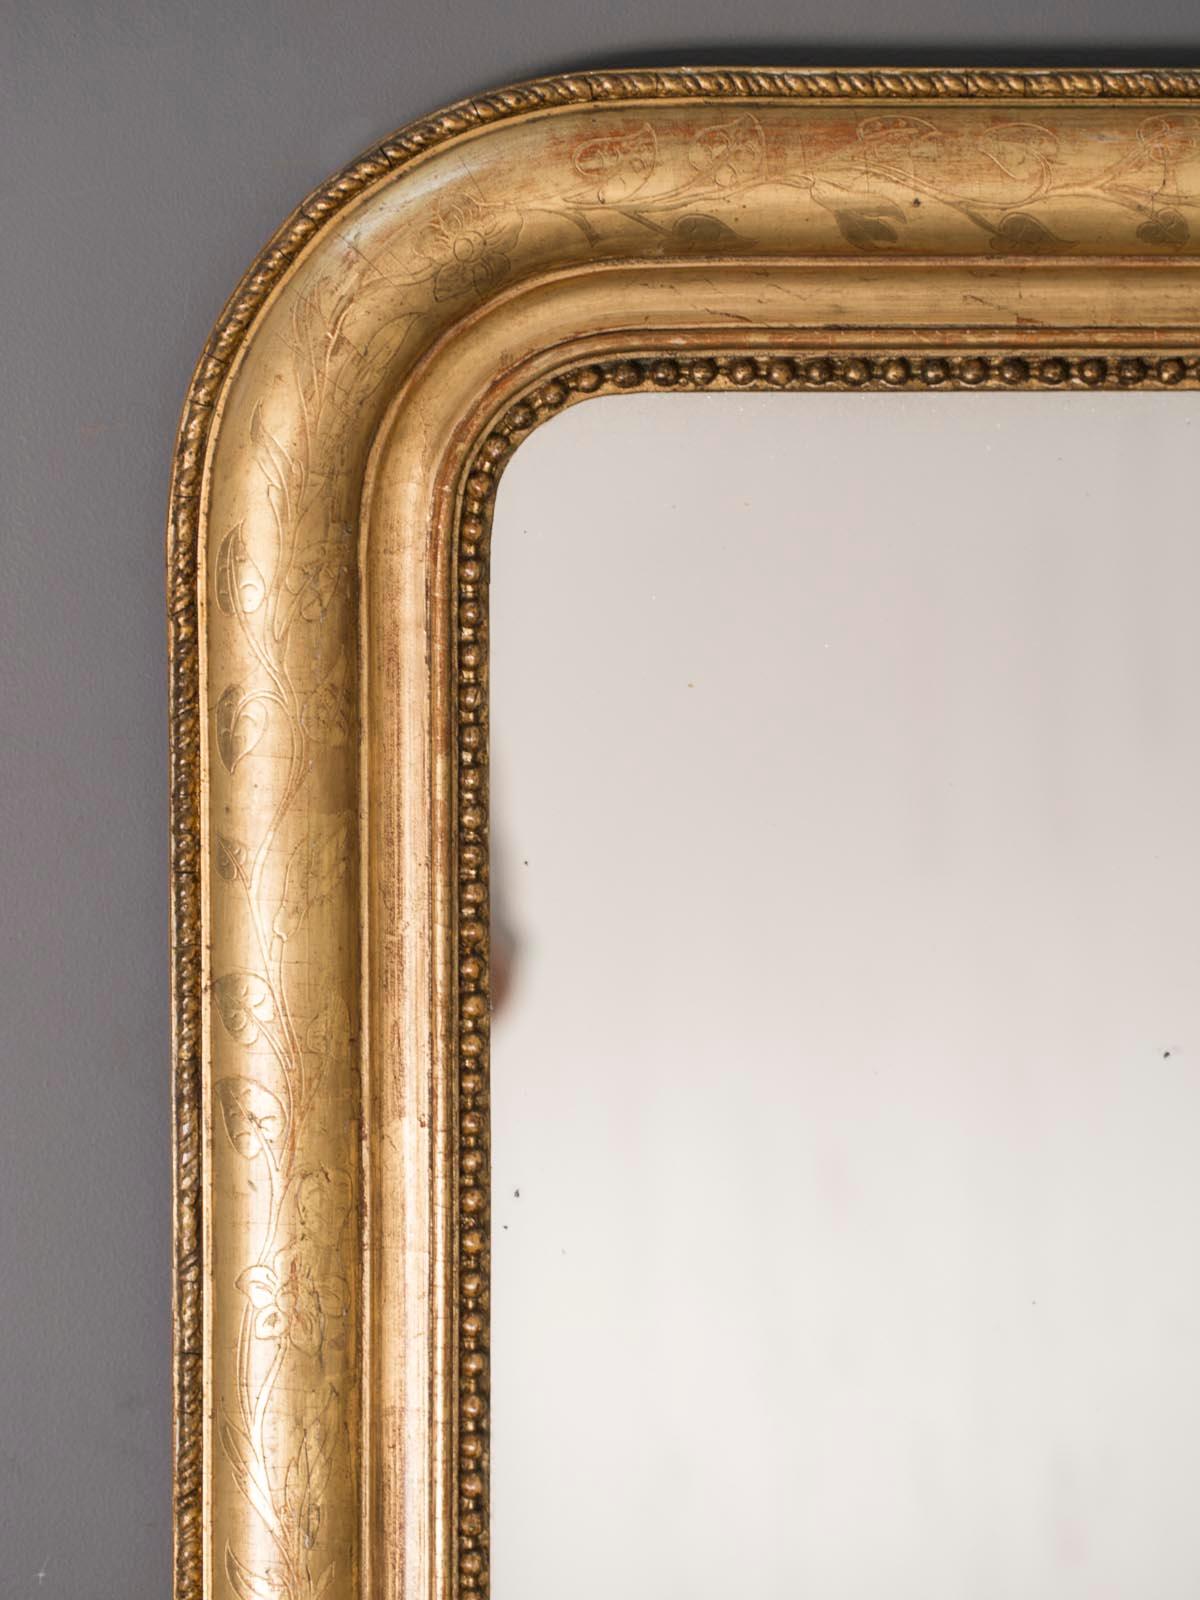 A classic antique French Louis Philippe gold leaf mirror from France, circa 1885 with the original mirror glass. The wonderfully elegant shape of this French mirror with its rounded shoulders and simple rectangular base is offset with the decorative